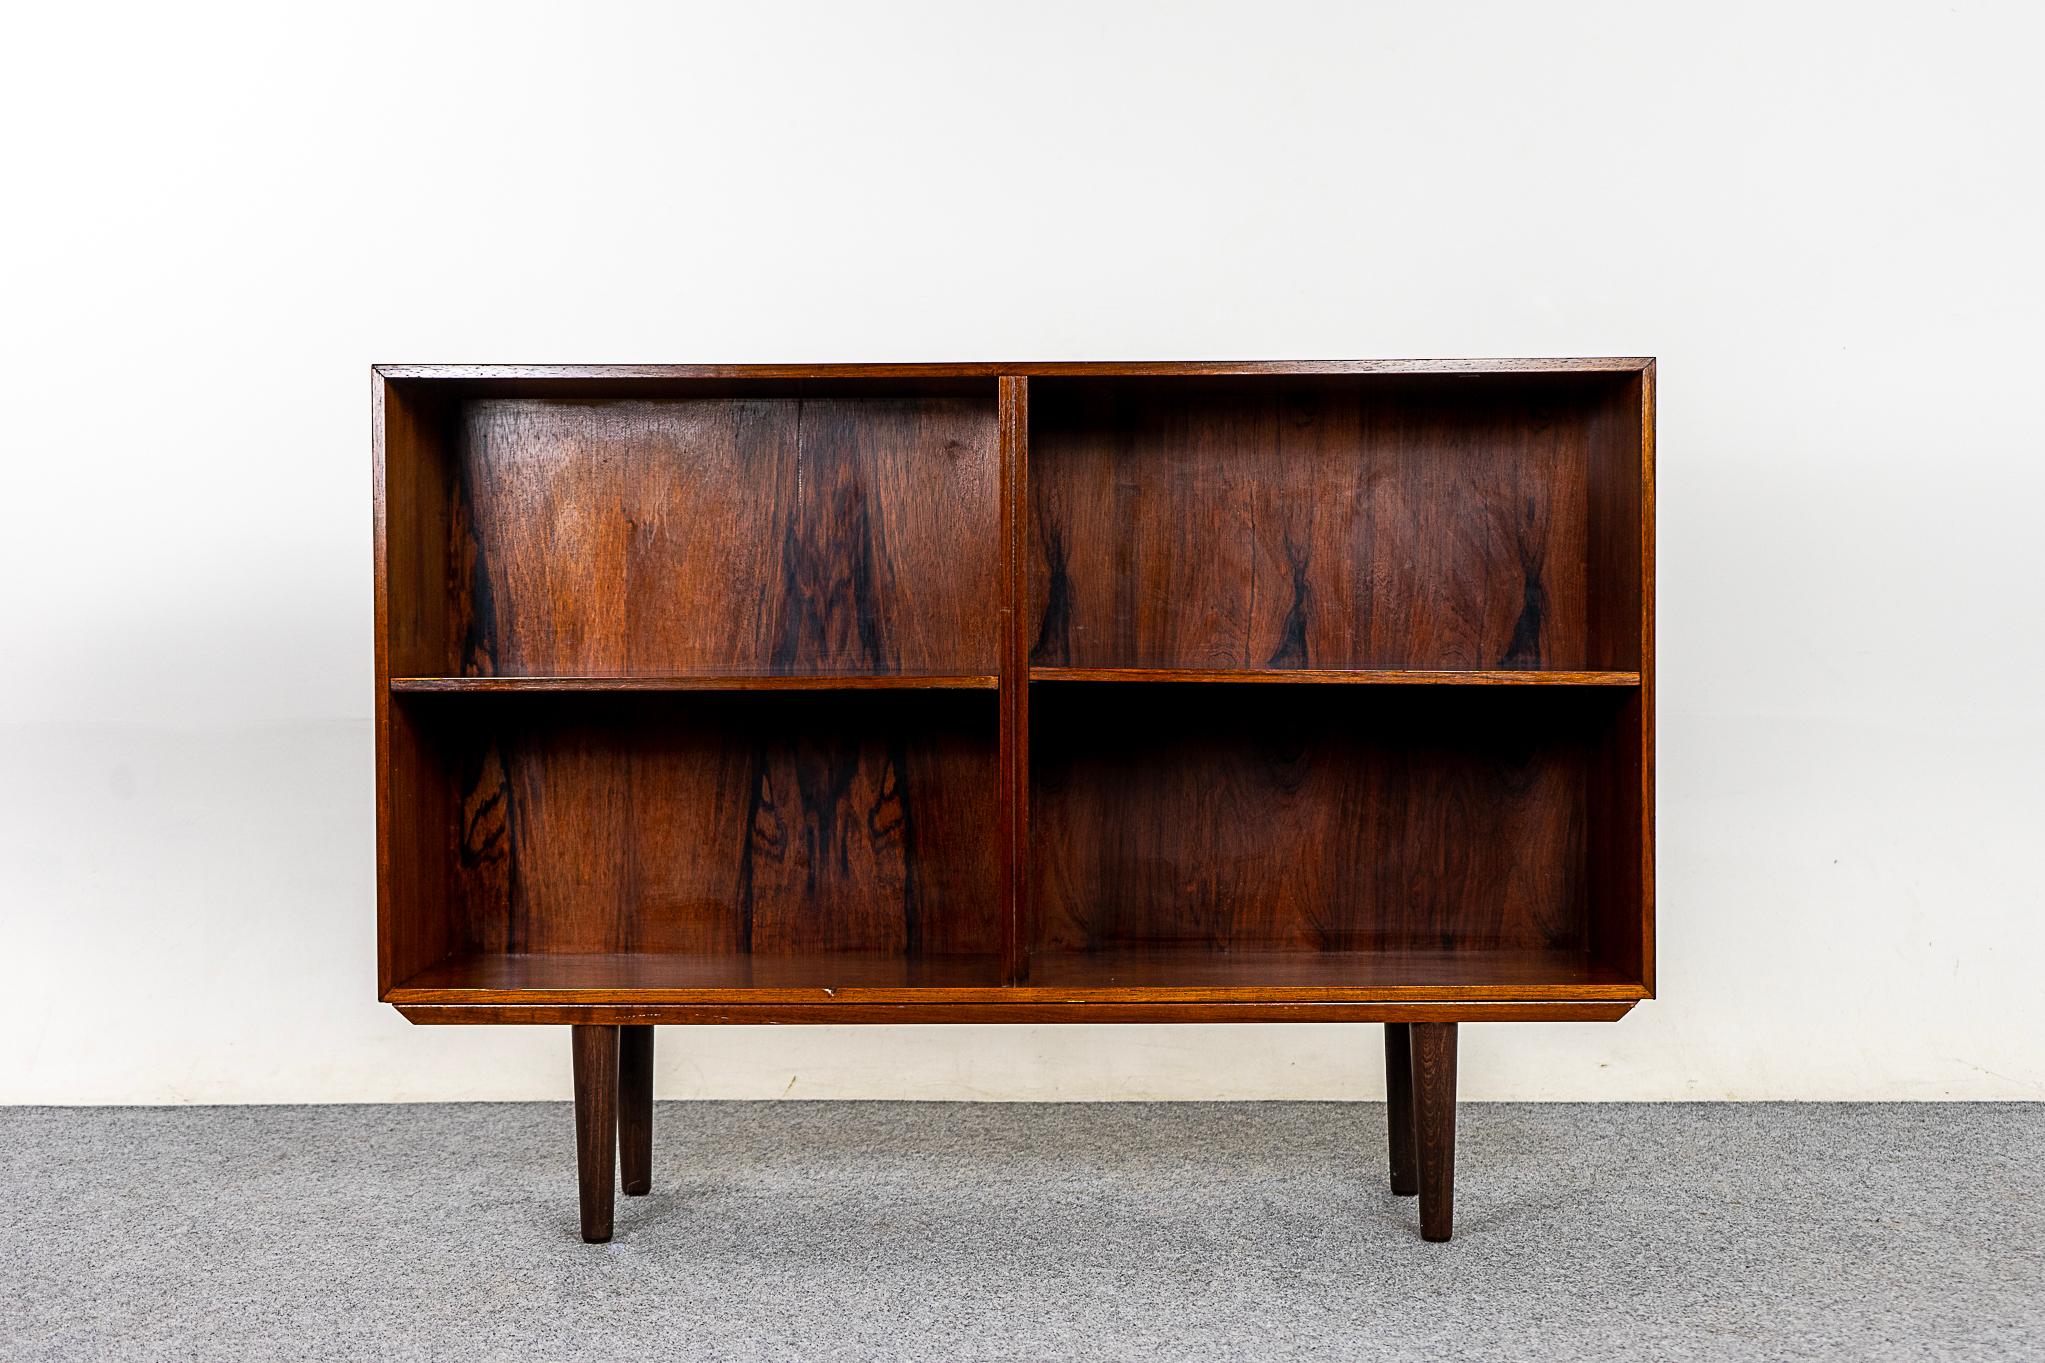 Rosewood Danish bookcase circa 1960's. Low profile open bookcase with adjustable shelving, removable legs. Compact design makes it the perfect condo sized storage solution.